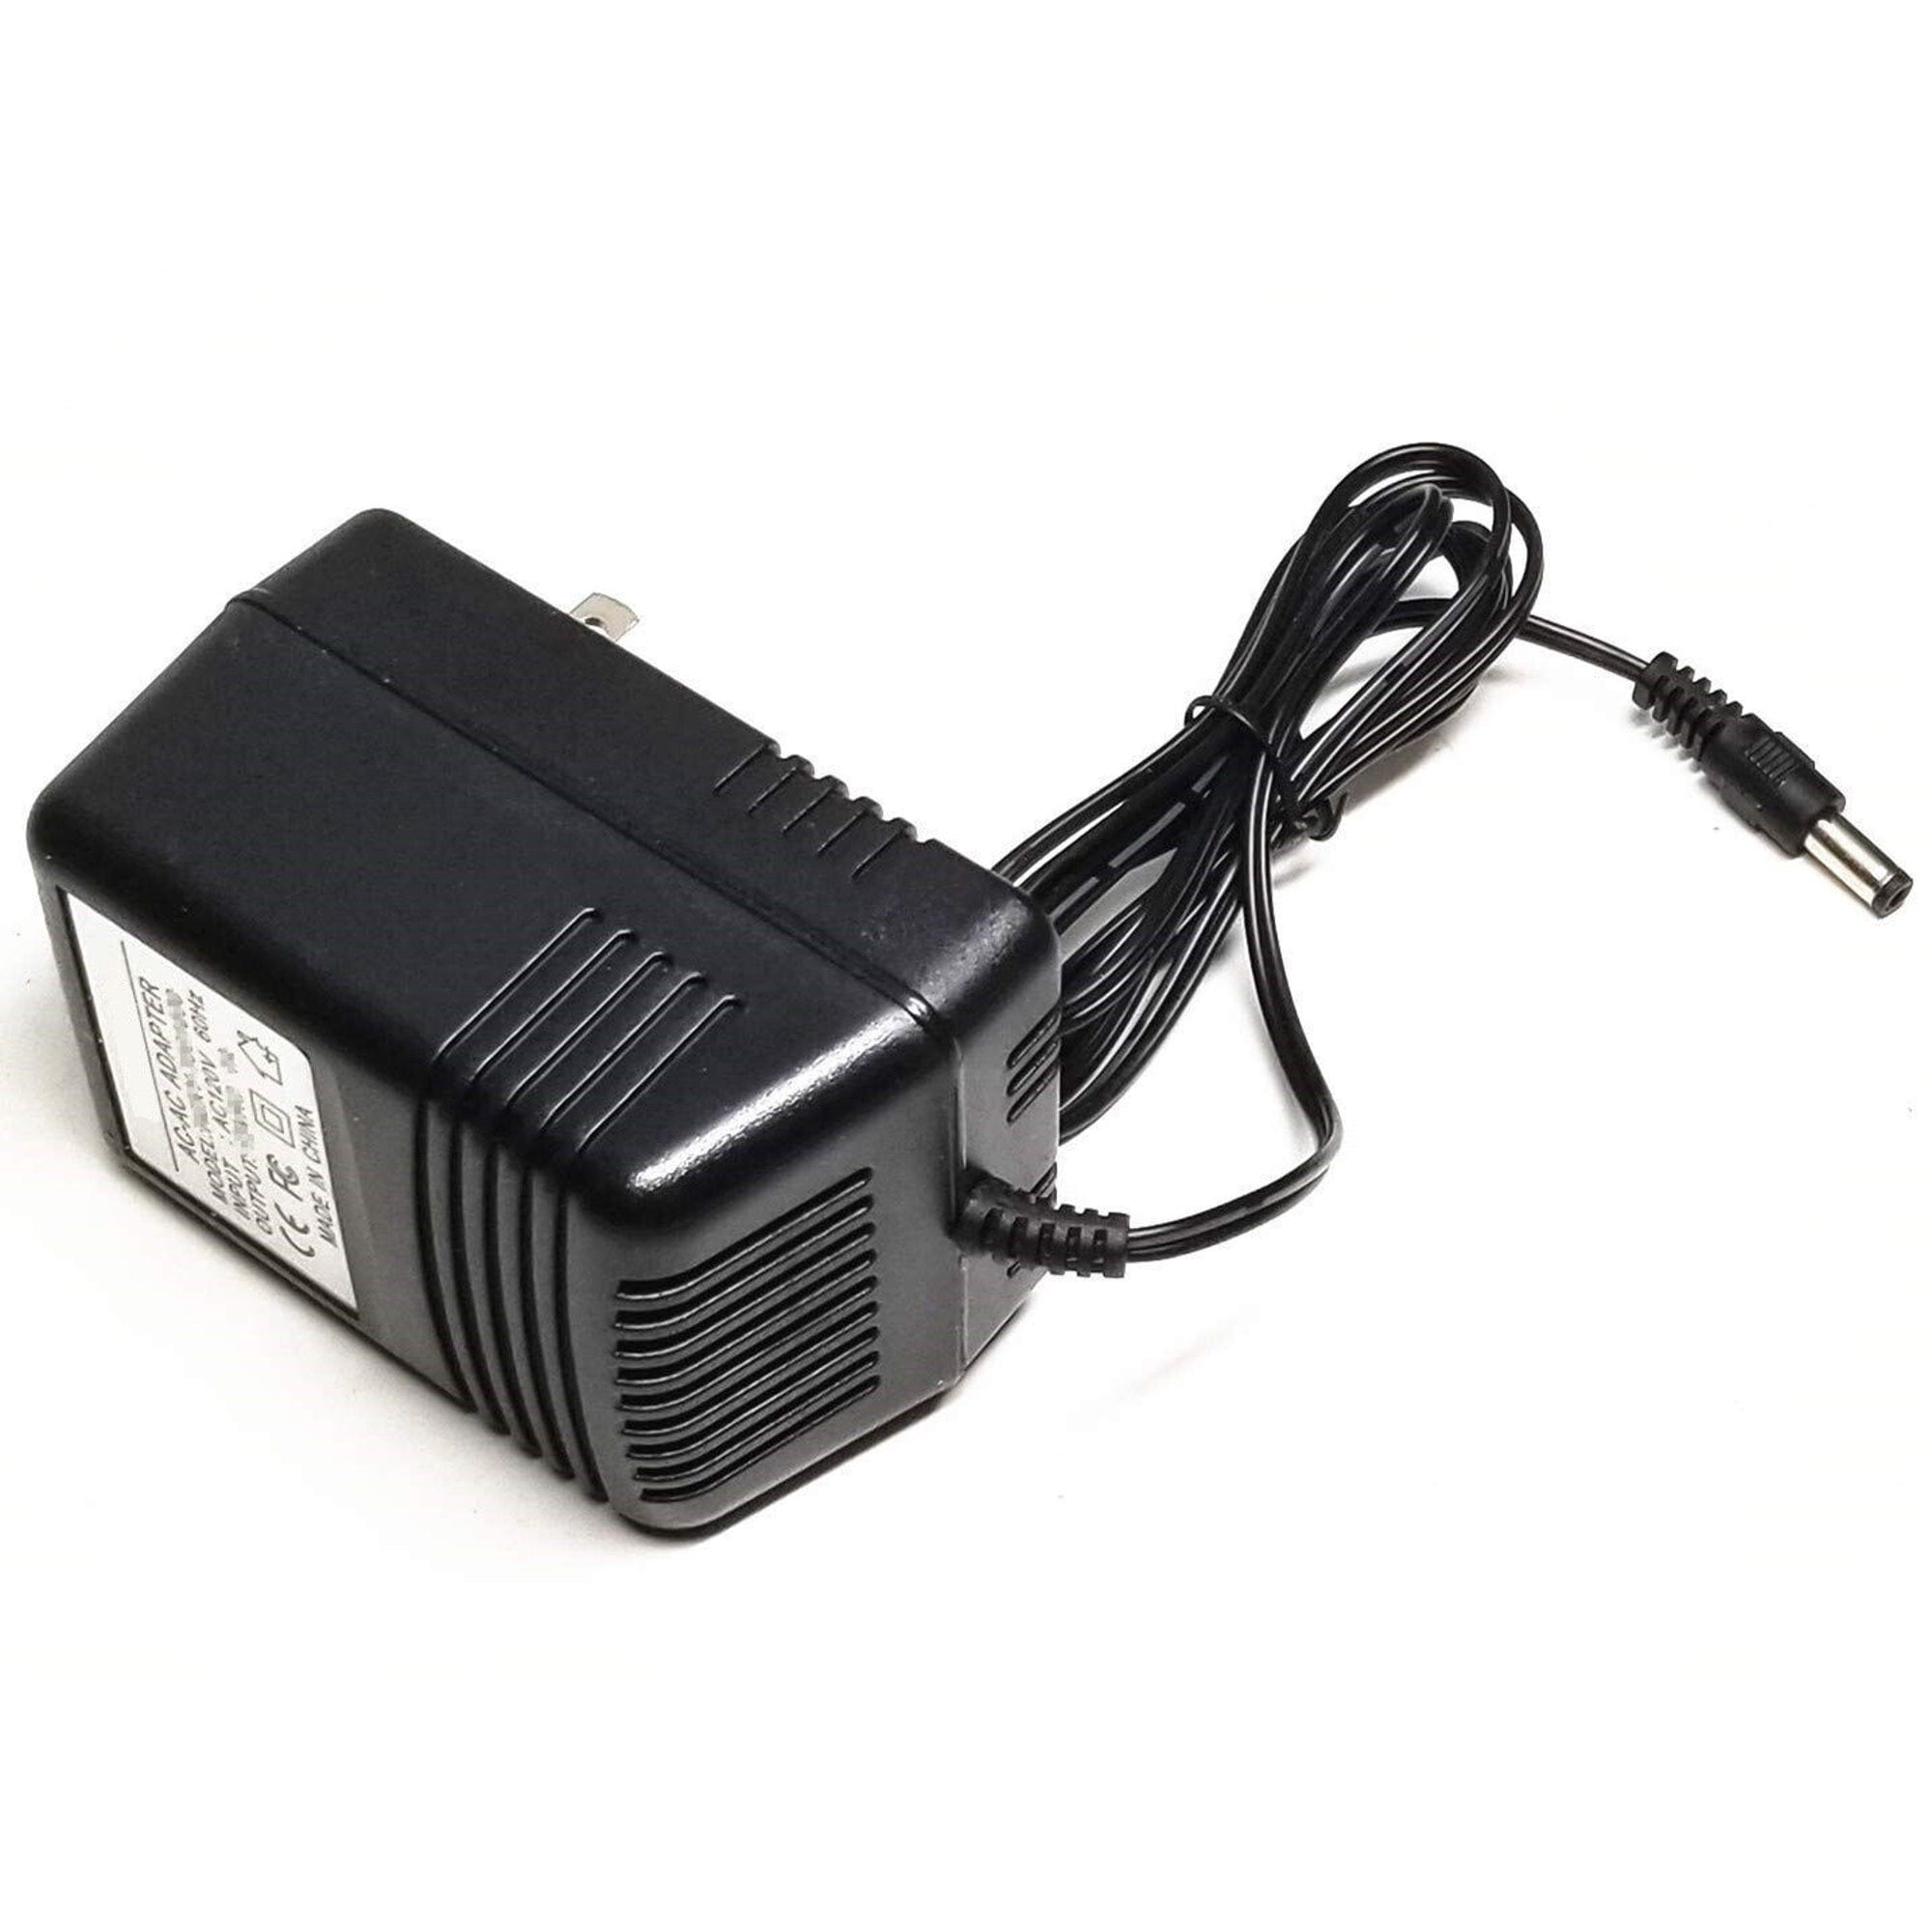 AC/AC Adapter for Black & Decker 7.2-Volt Cordless Drill B&D BD 418337-18  9099 9099K 9099KB Type 1 9099KC 9099KCB BDC752 9099KCAB BDC752K FS9099  418337-15 Power Supply Charger 